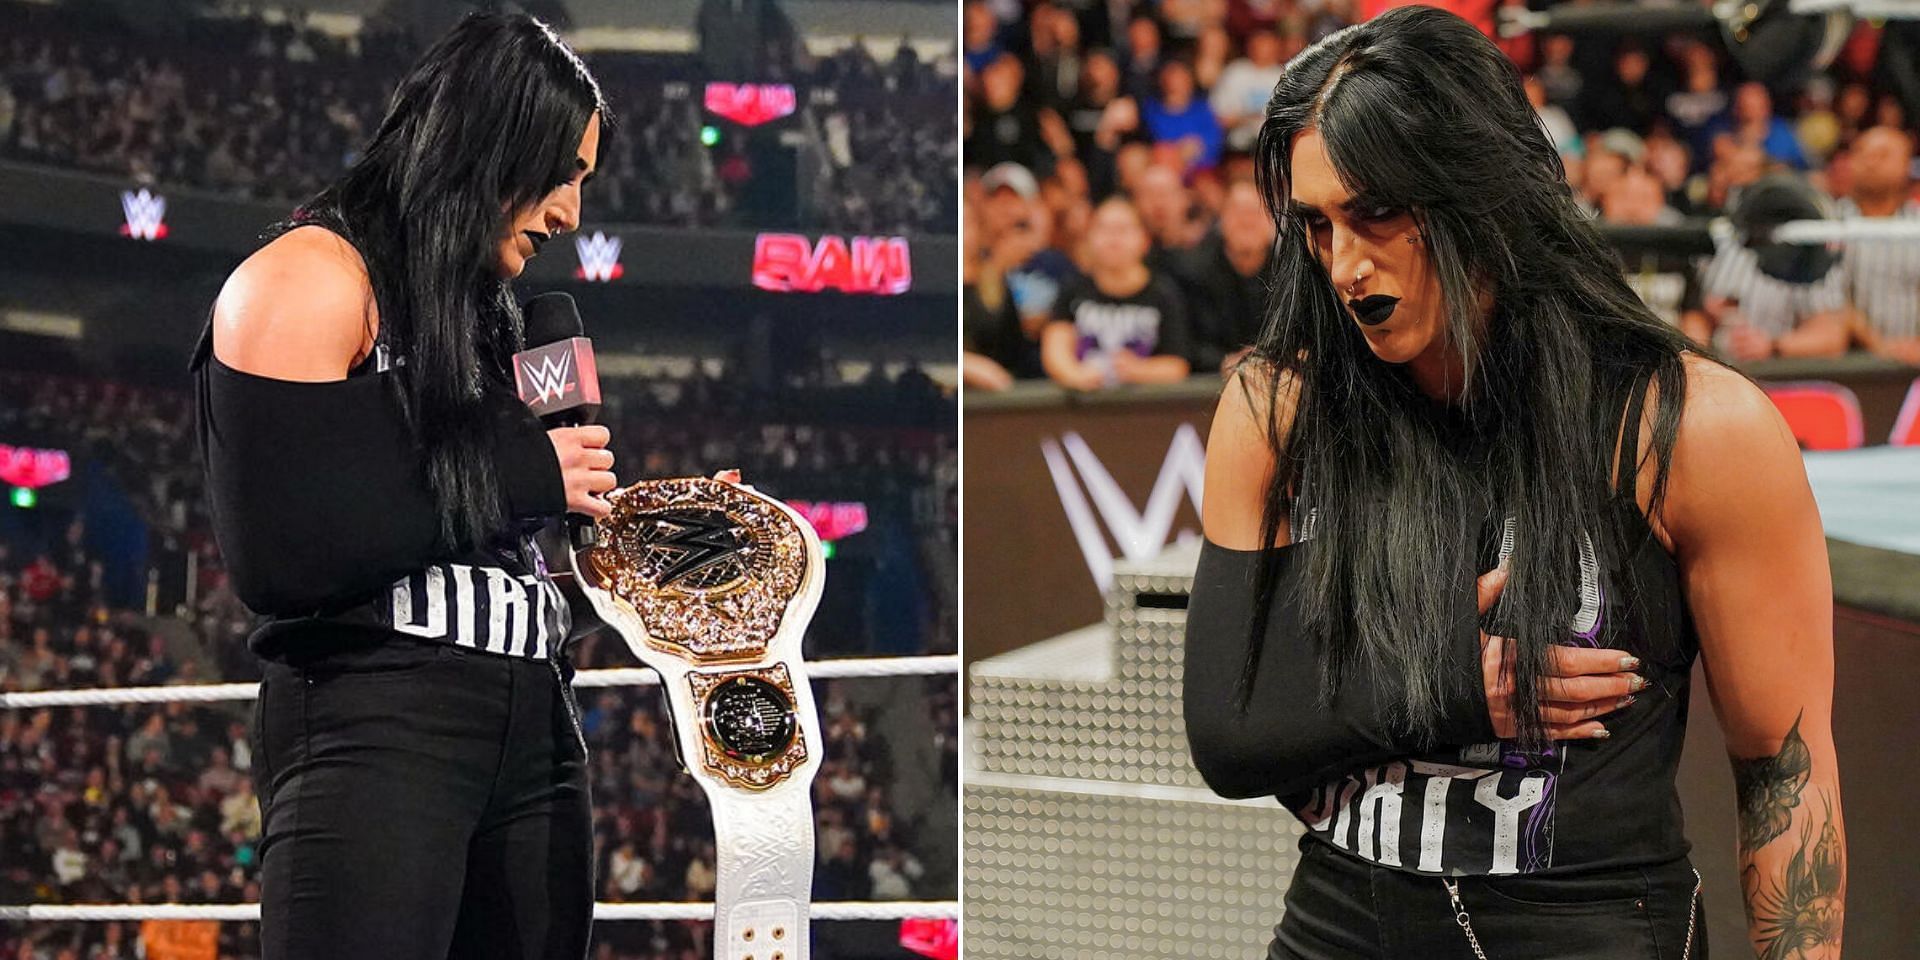 Rhea Ripley relinquished her title on RAW